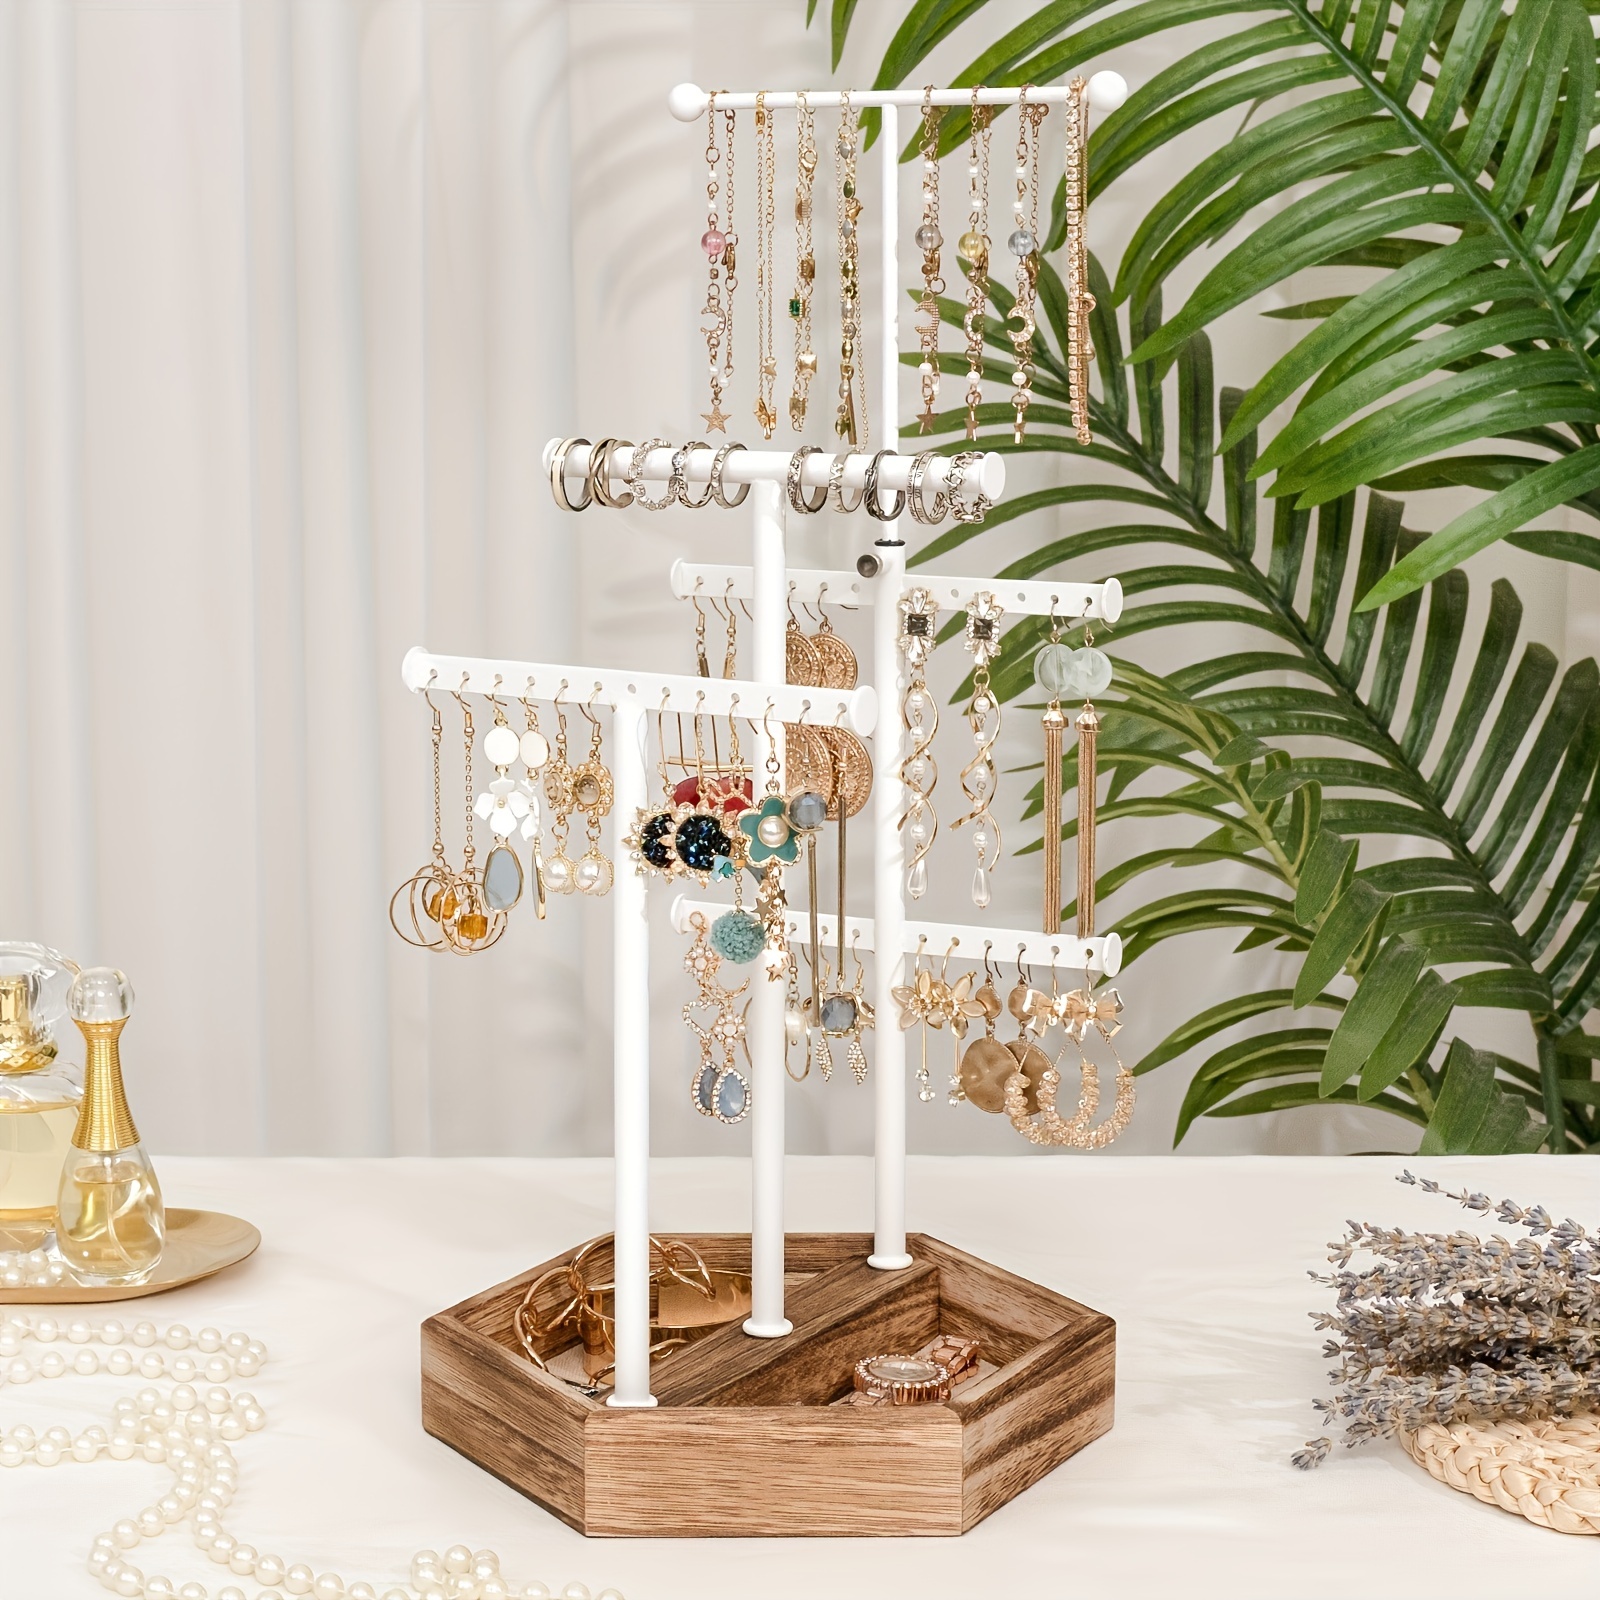 Emfogo Earring Organizer, Triple Rods 5 Layer Jewelry Organizer Stand With  Wood Basic Large Hexagonal Storage, Jewelry Holder Stand For Necklace Earri